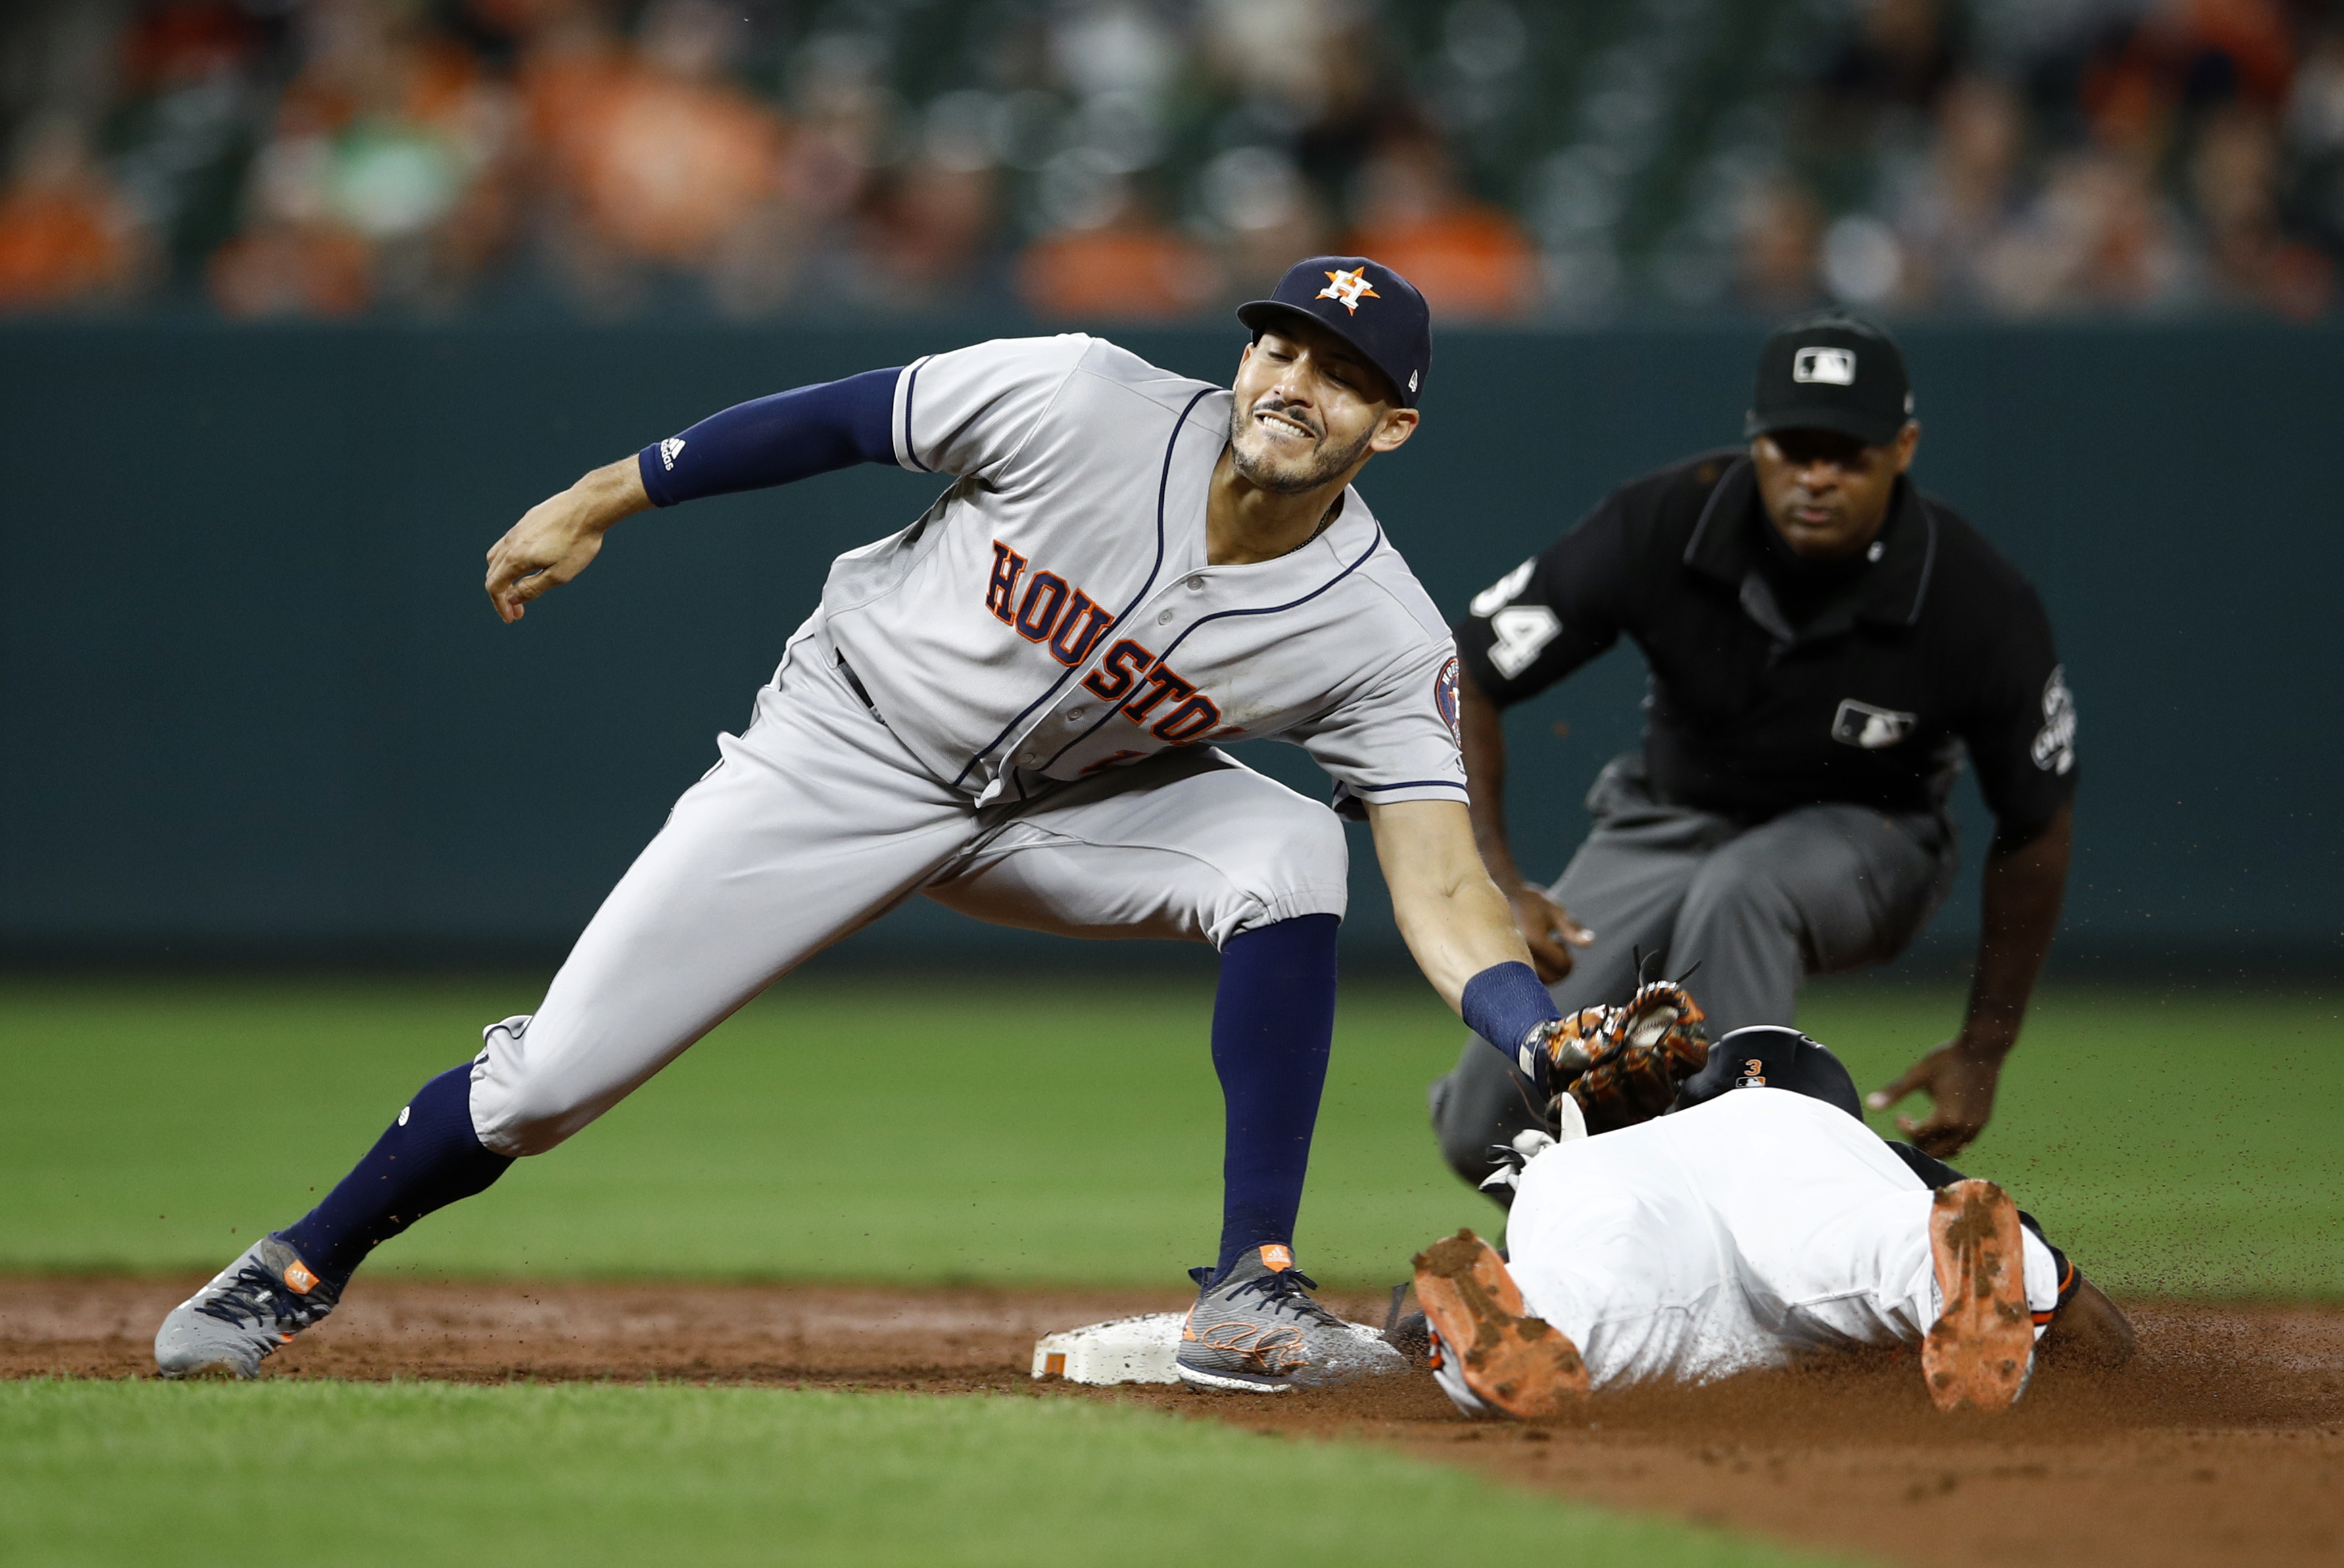 Cole tunes up for playoffs, helps Astros beat Orioles 2-1